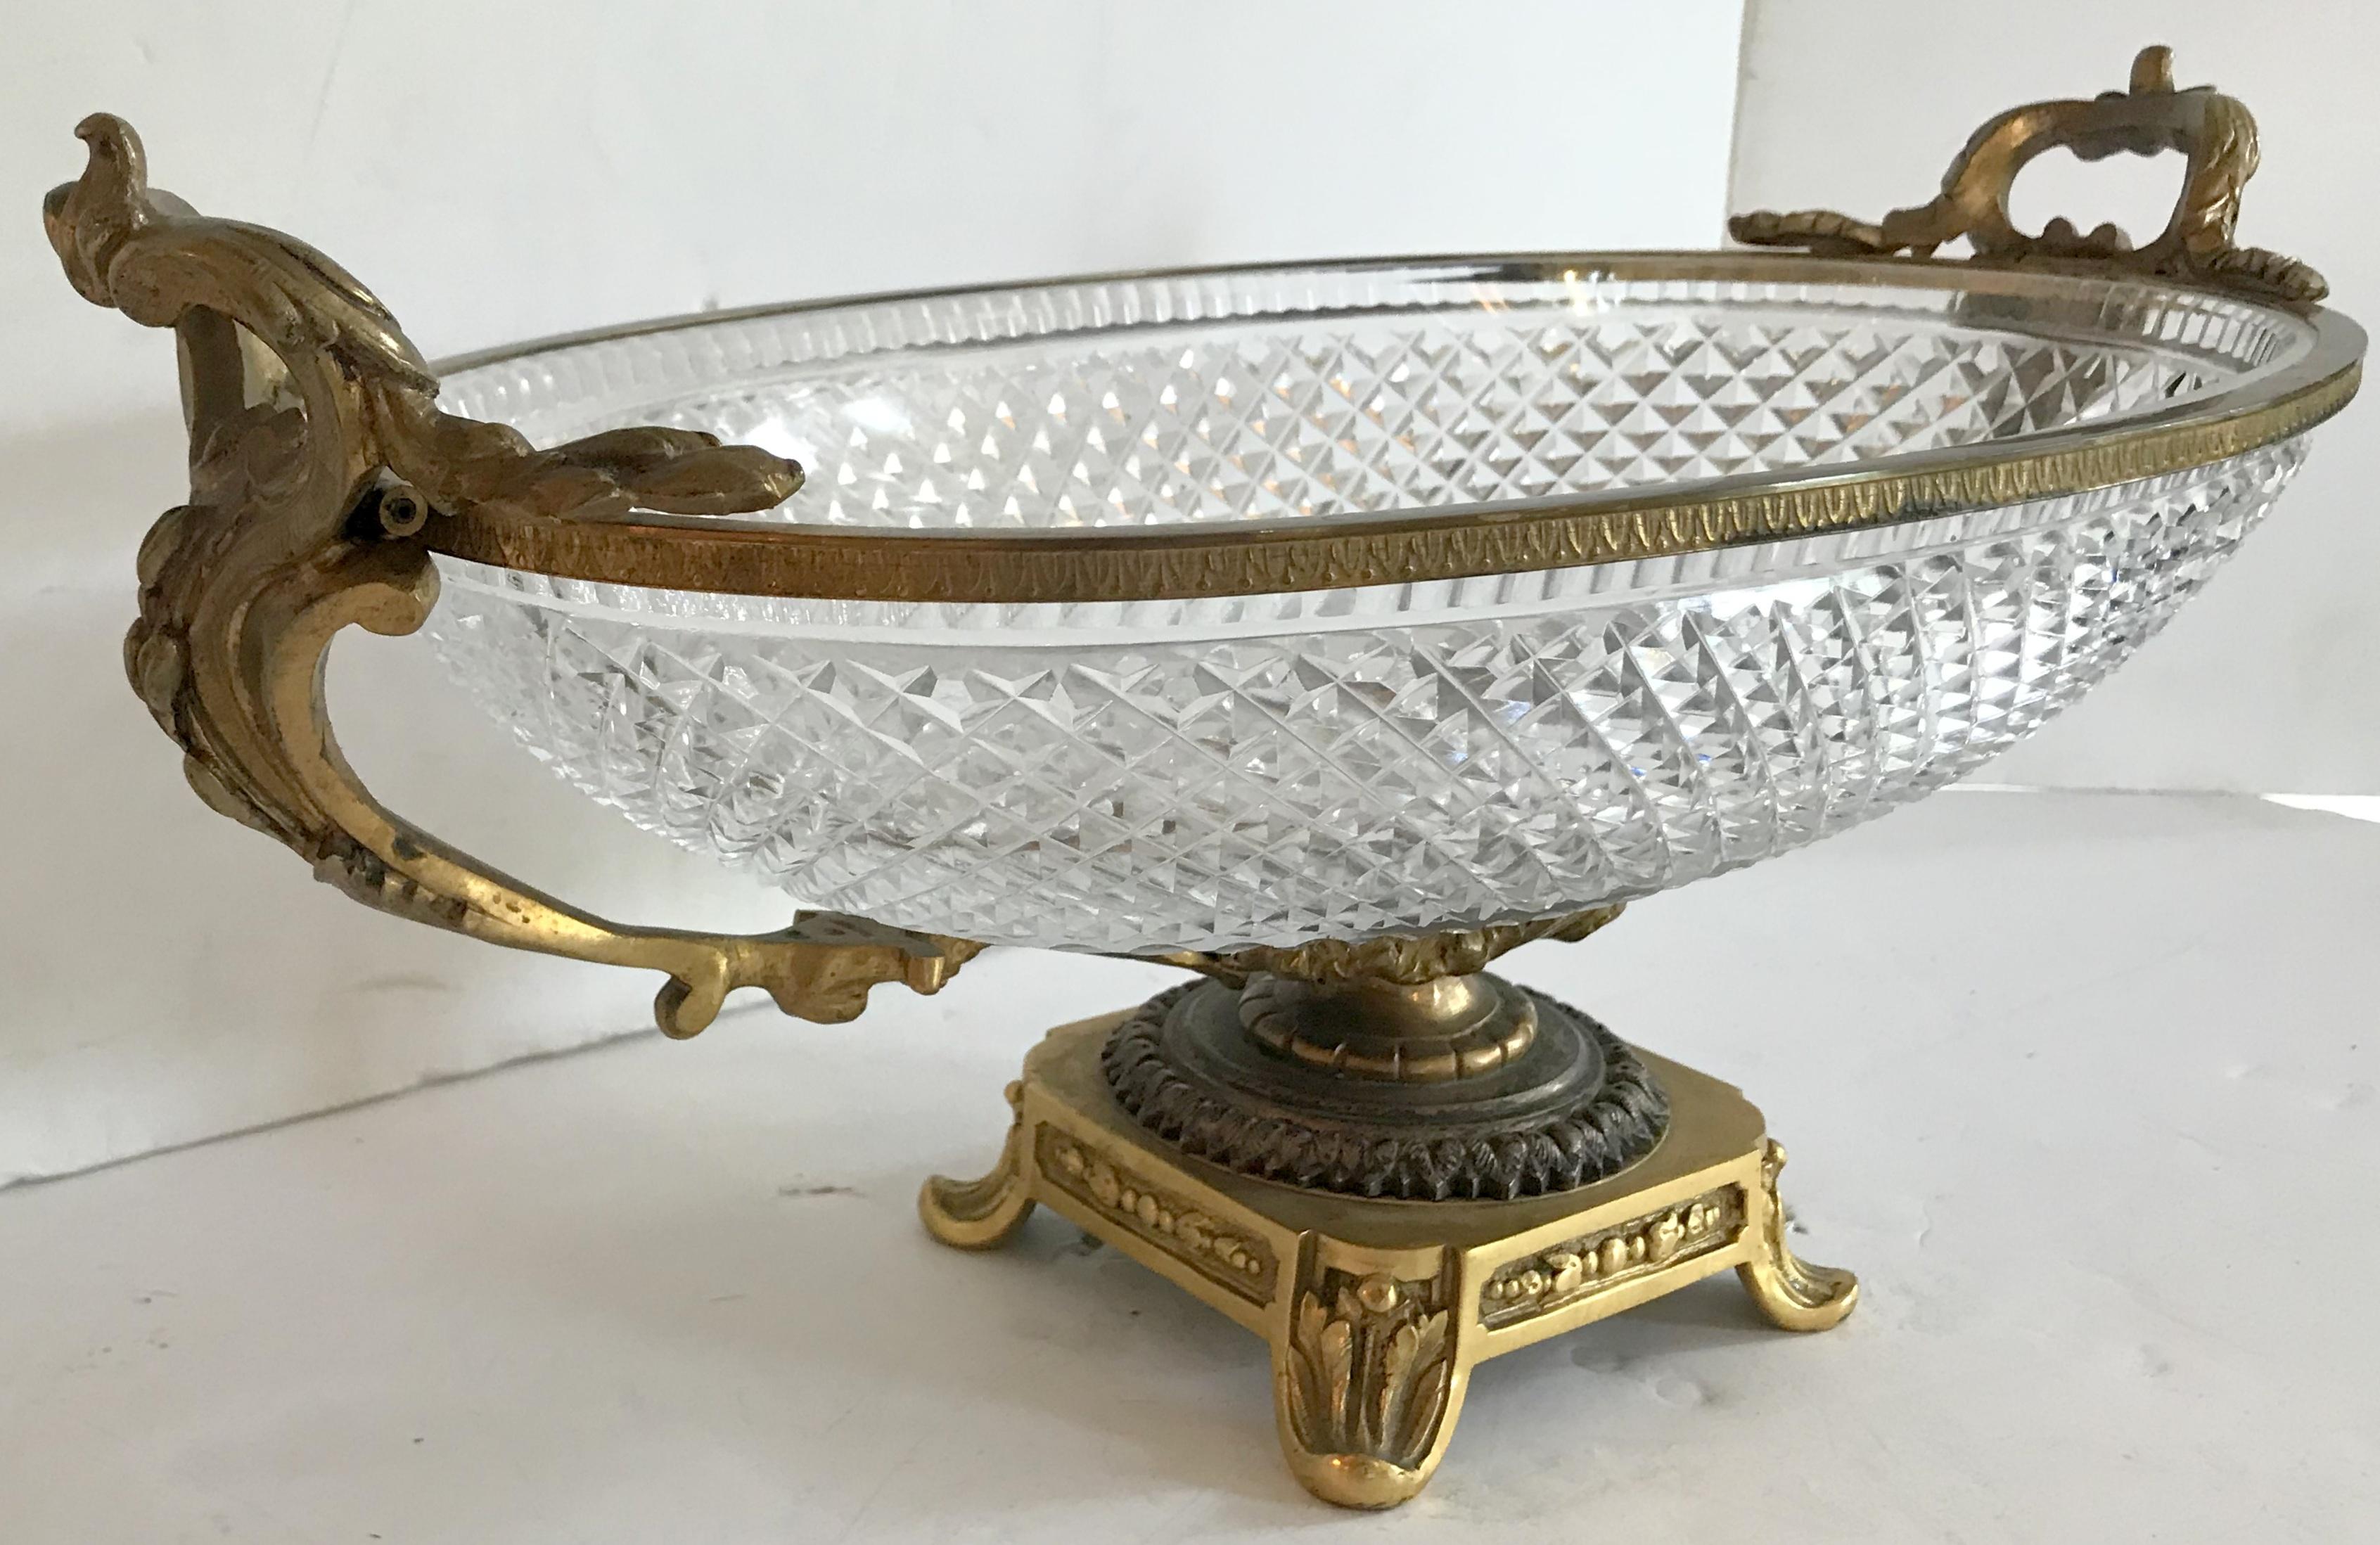 A wonderful large French gilt bronze and cut crystal ormolu-mounted centerpiece with filigree pedestal oval bowl with two open handles.
In the manner of Baccarat.